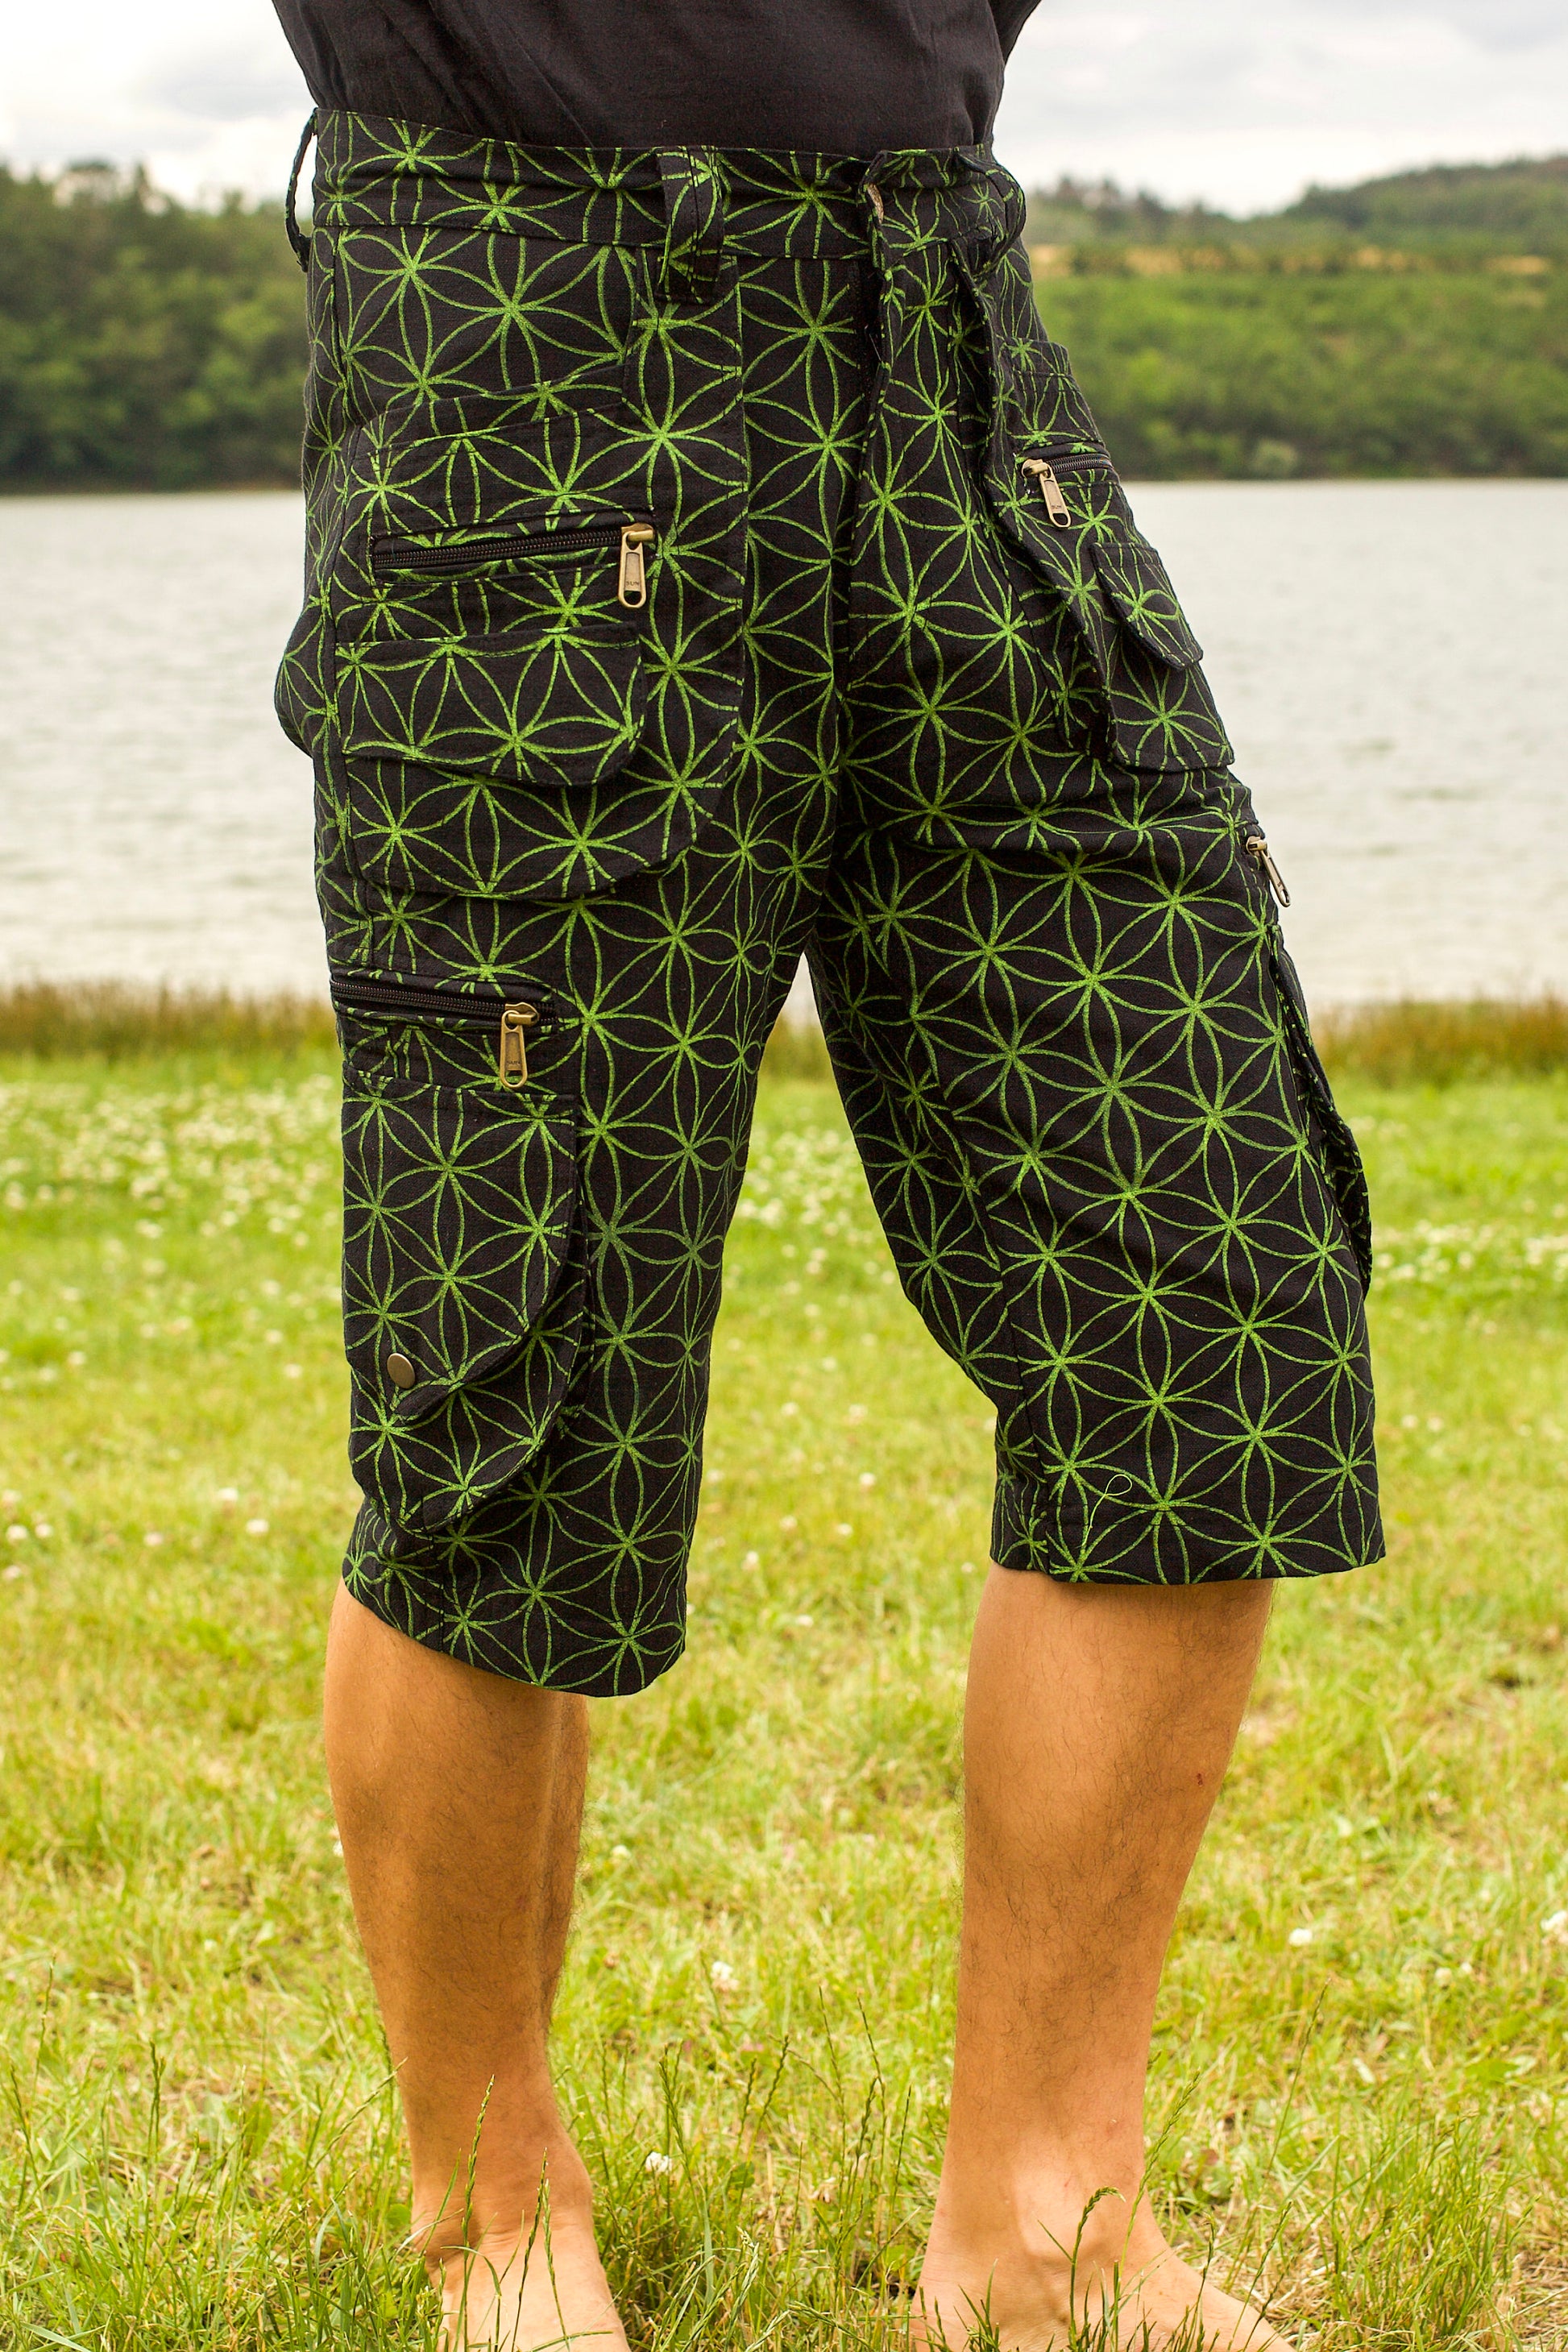 green Flower of Life Pants with many pockets - intelligent 2 in 1 shorts or long pants - handmade comfortable sacred geometry pattern